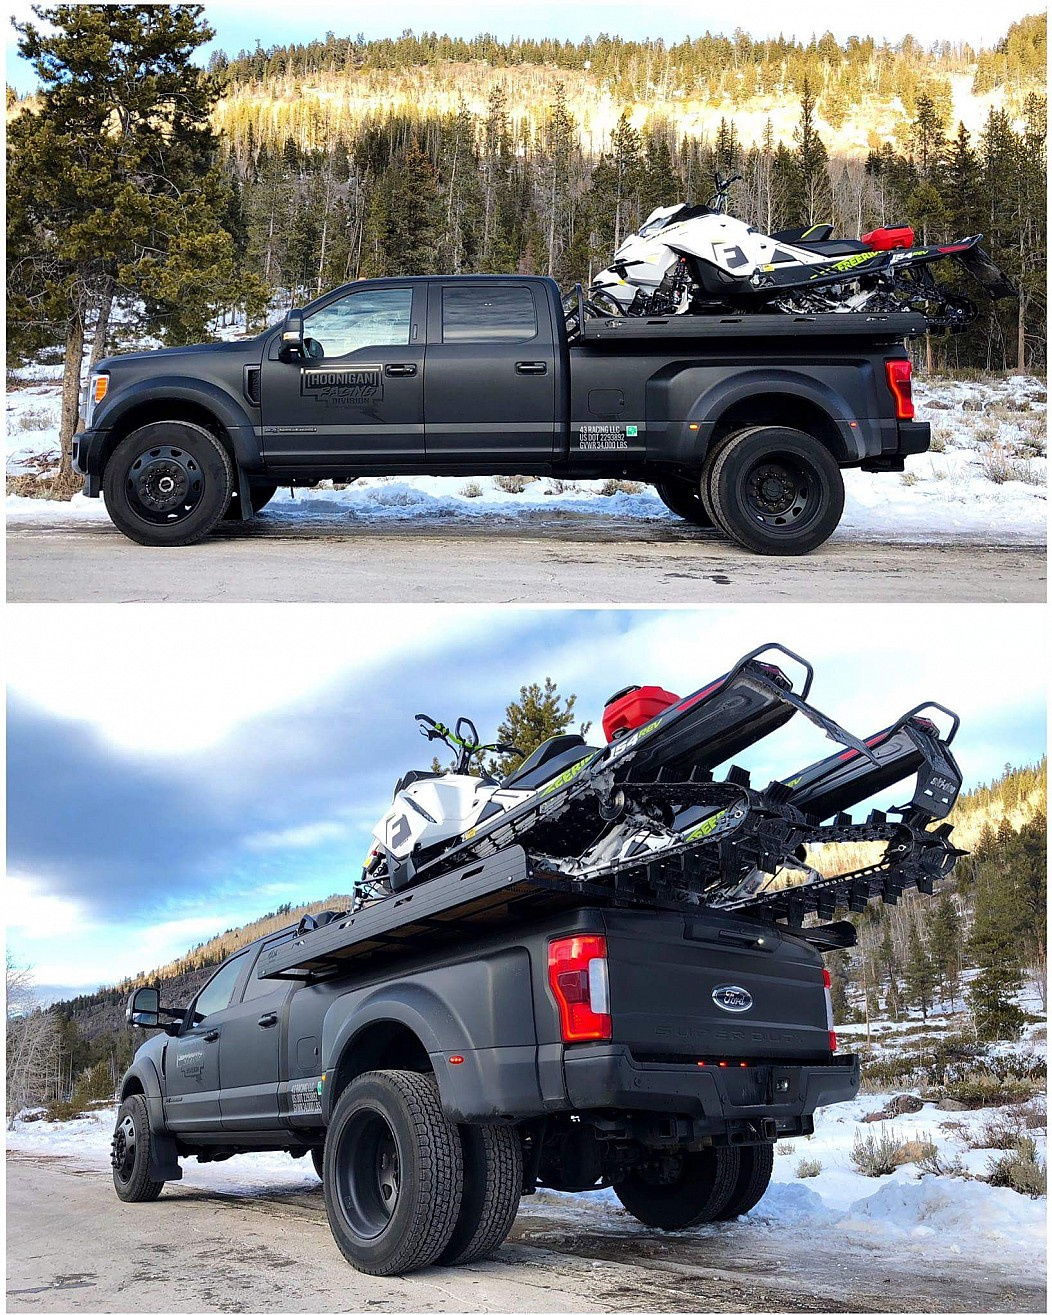 Hoonigan Racing snowmobile atop a Ford F-450